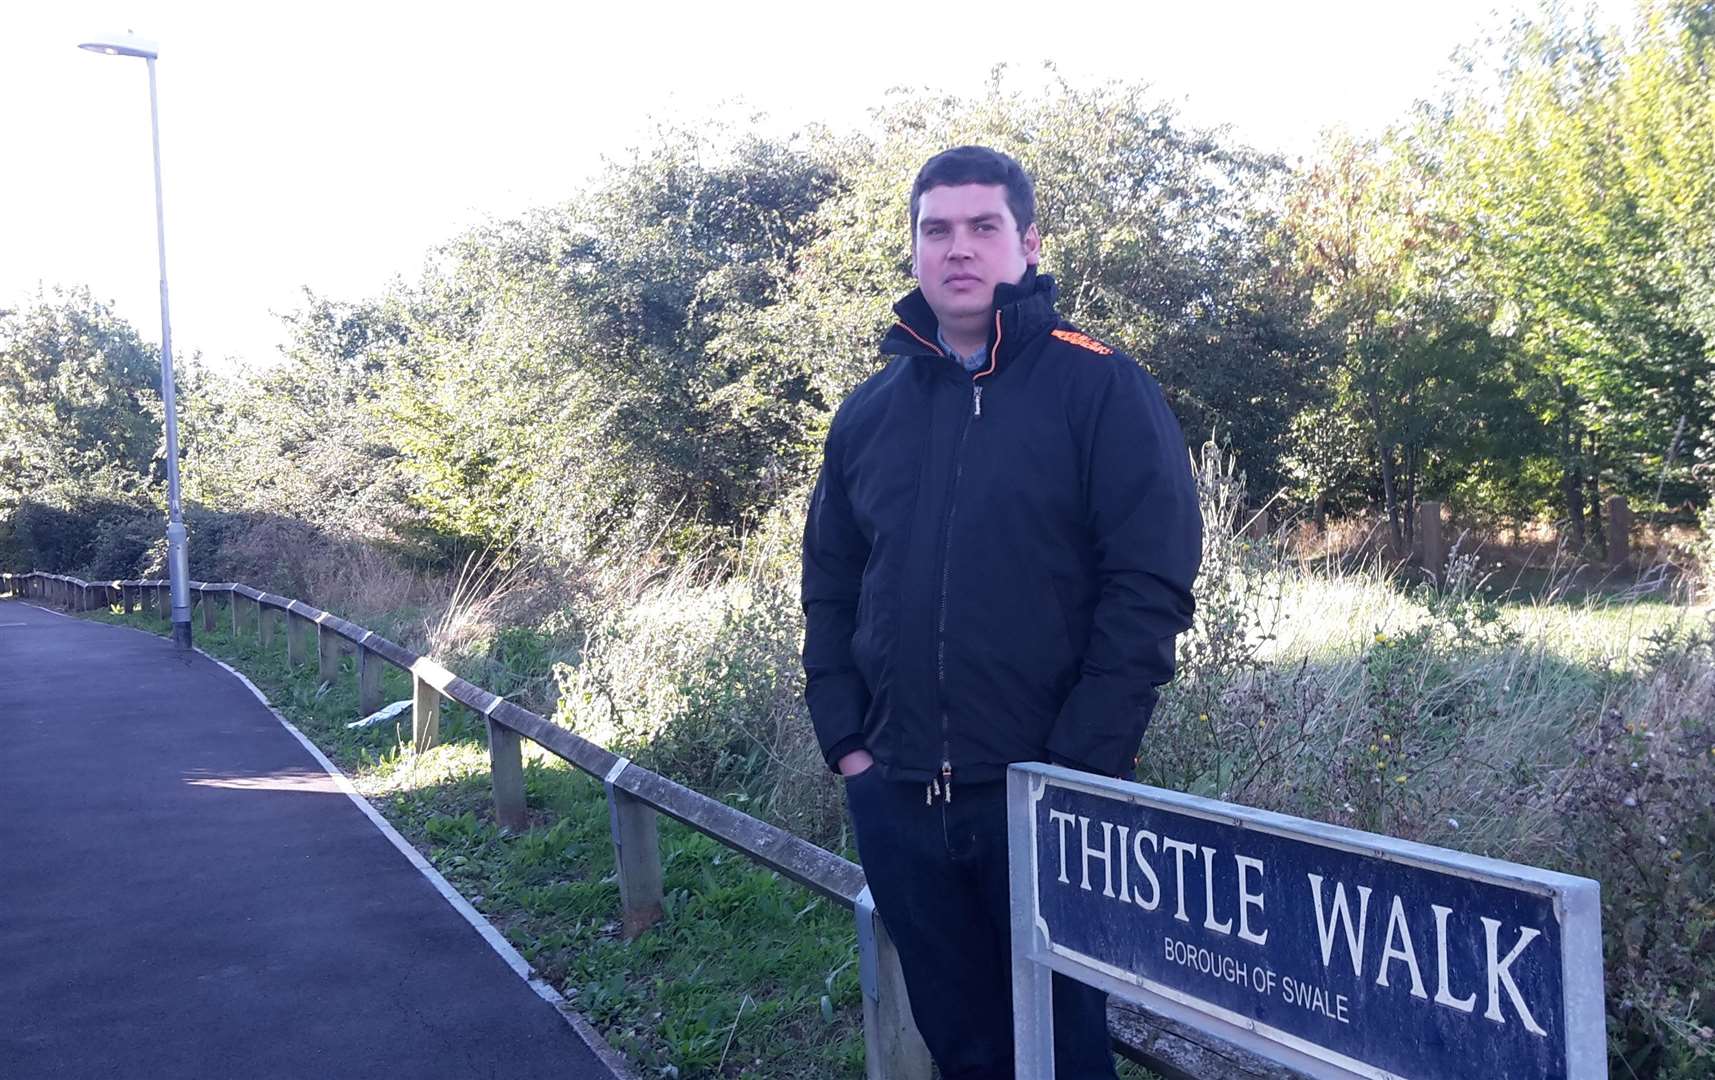 Elliott Jayes with the light he says needs fixing in Thistle Walk, Minster